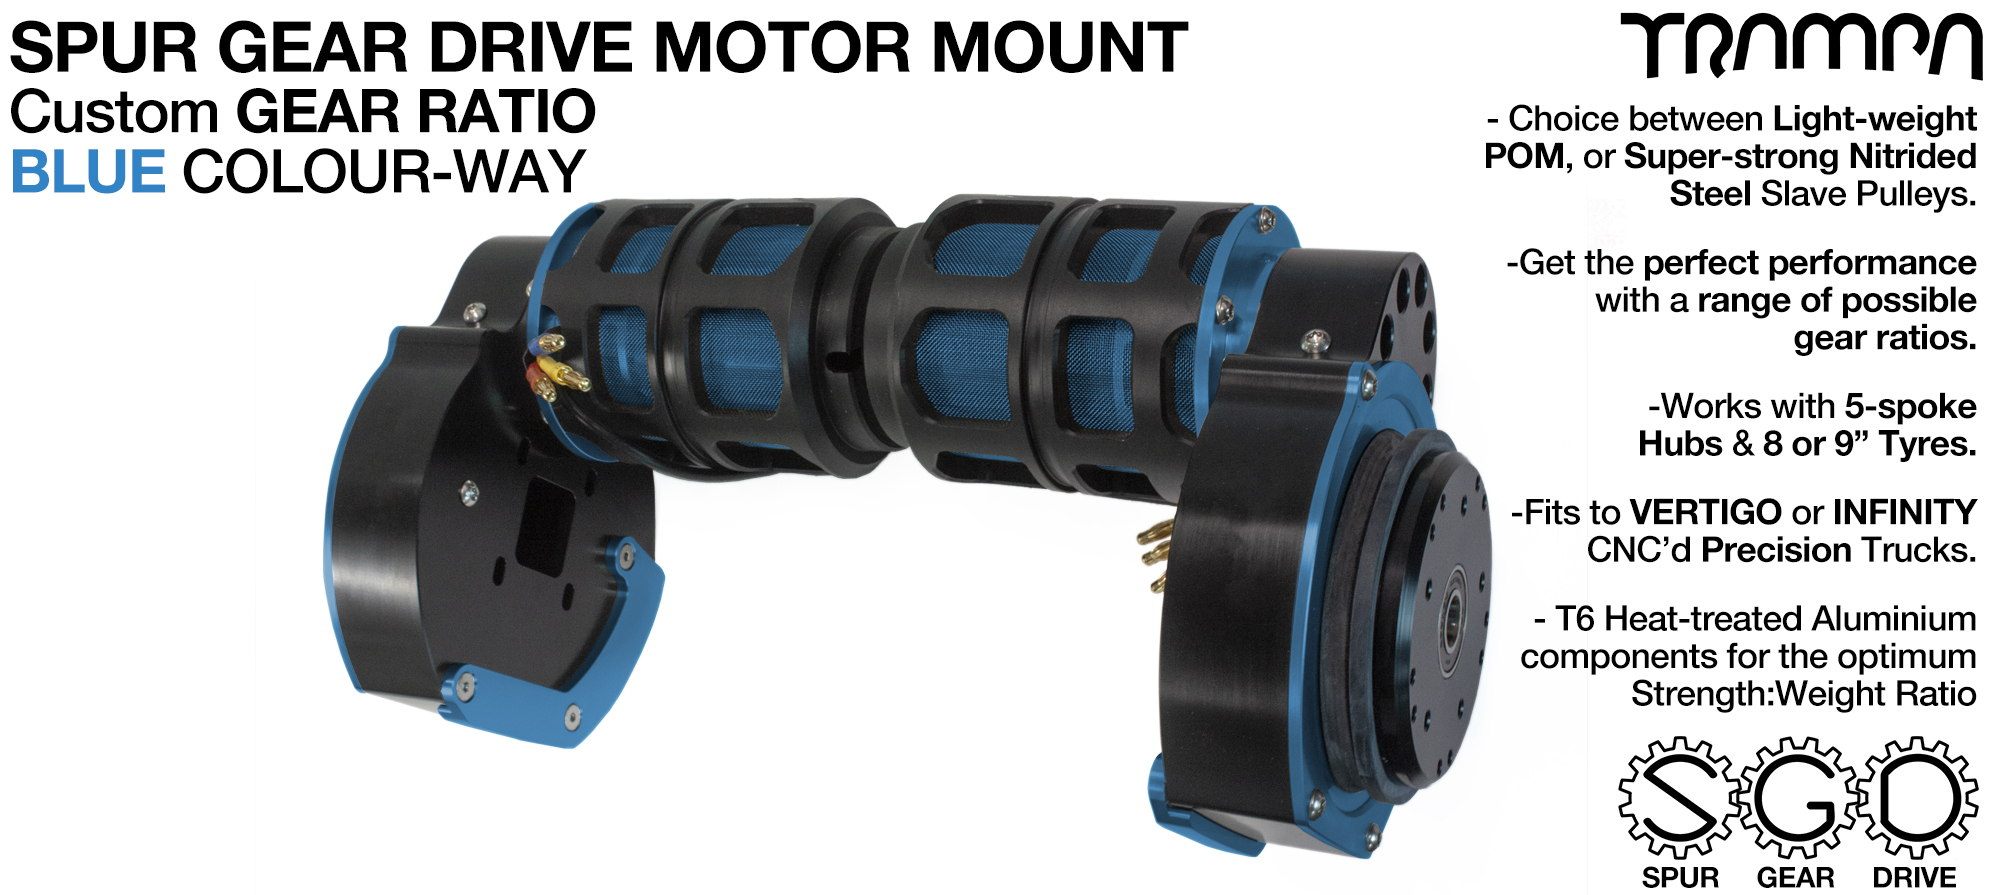 Mountainboard Spur Gear Drive TWIN Motor Mount with PULLEYS & FILTERSt - BLUE